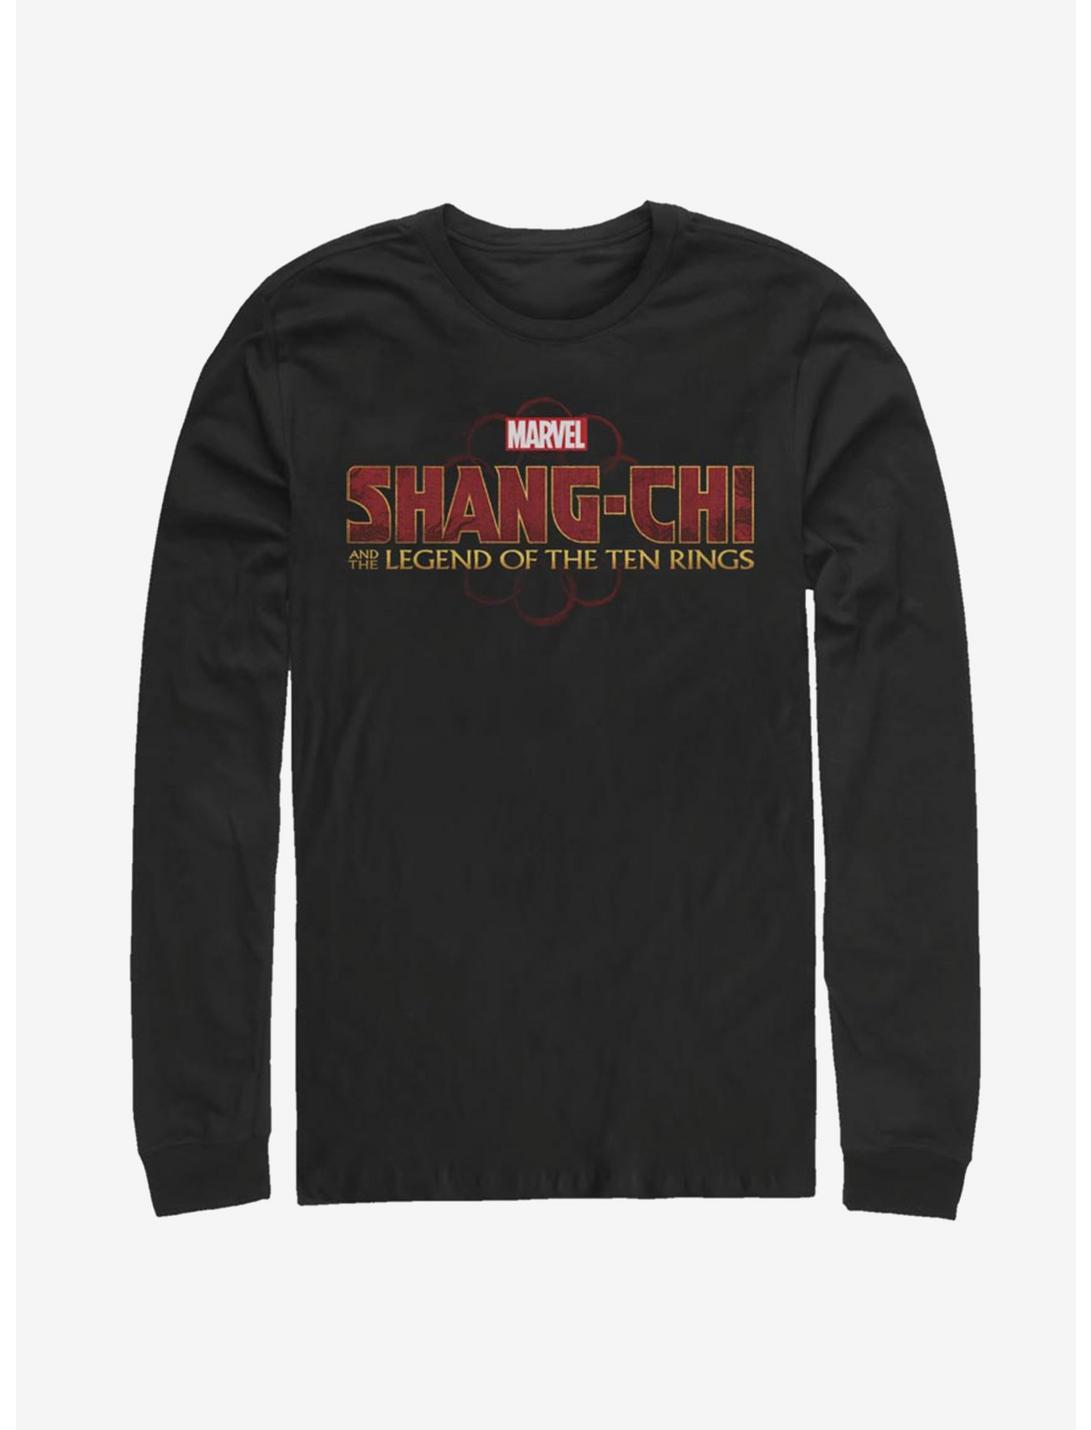 Marvel Shang-Chi And The Legend Of The Ten Rings Long-Sleeve T-Shirt, BLACK, hi-res